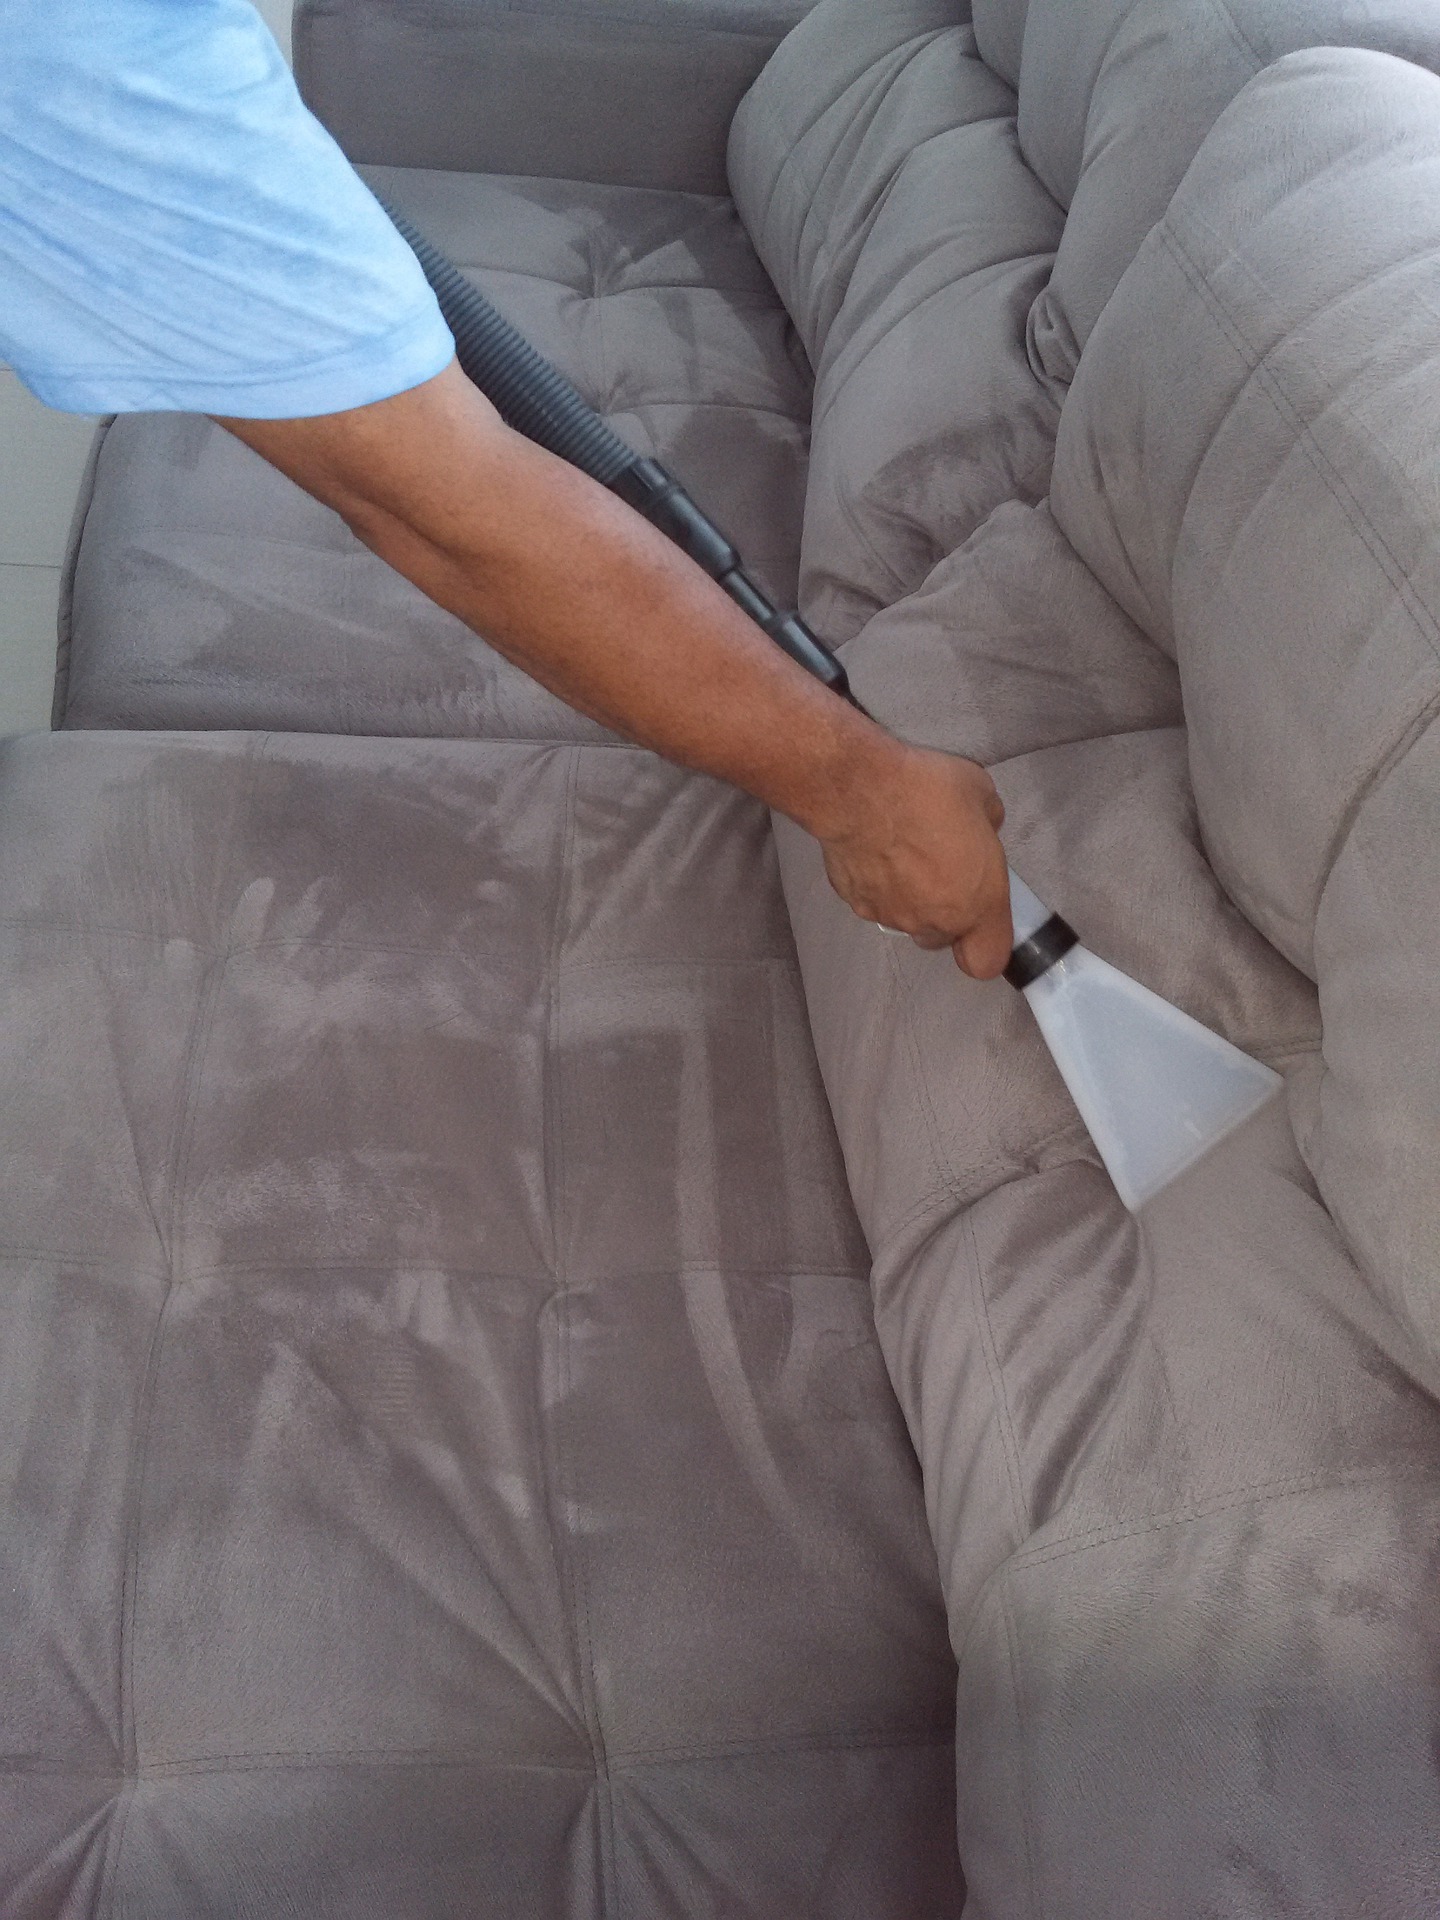 COUCH CLEANING